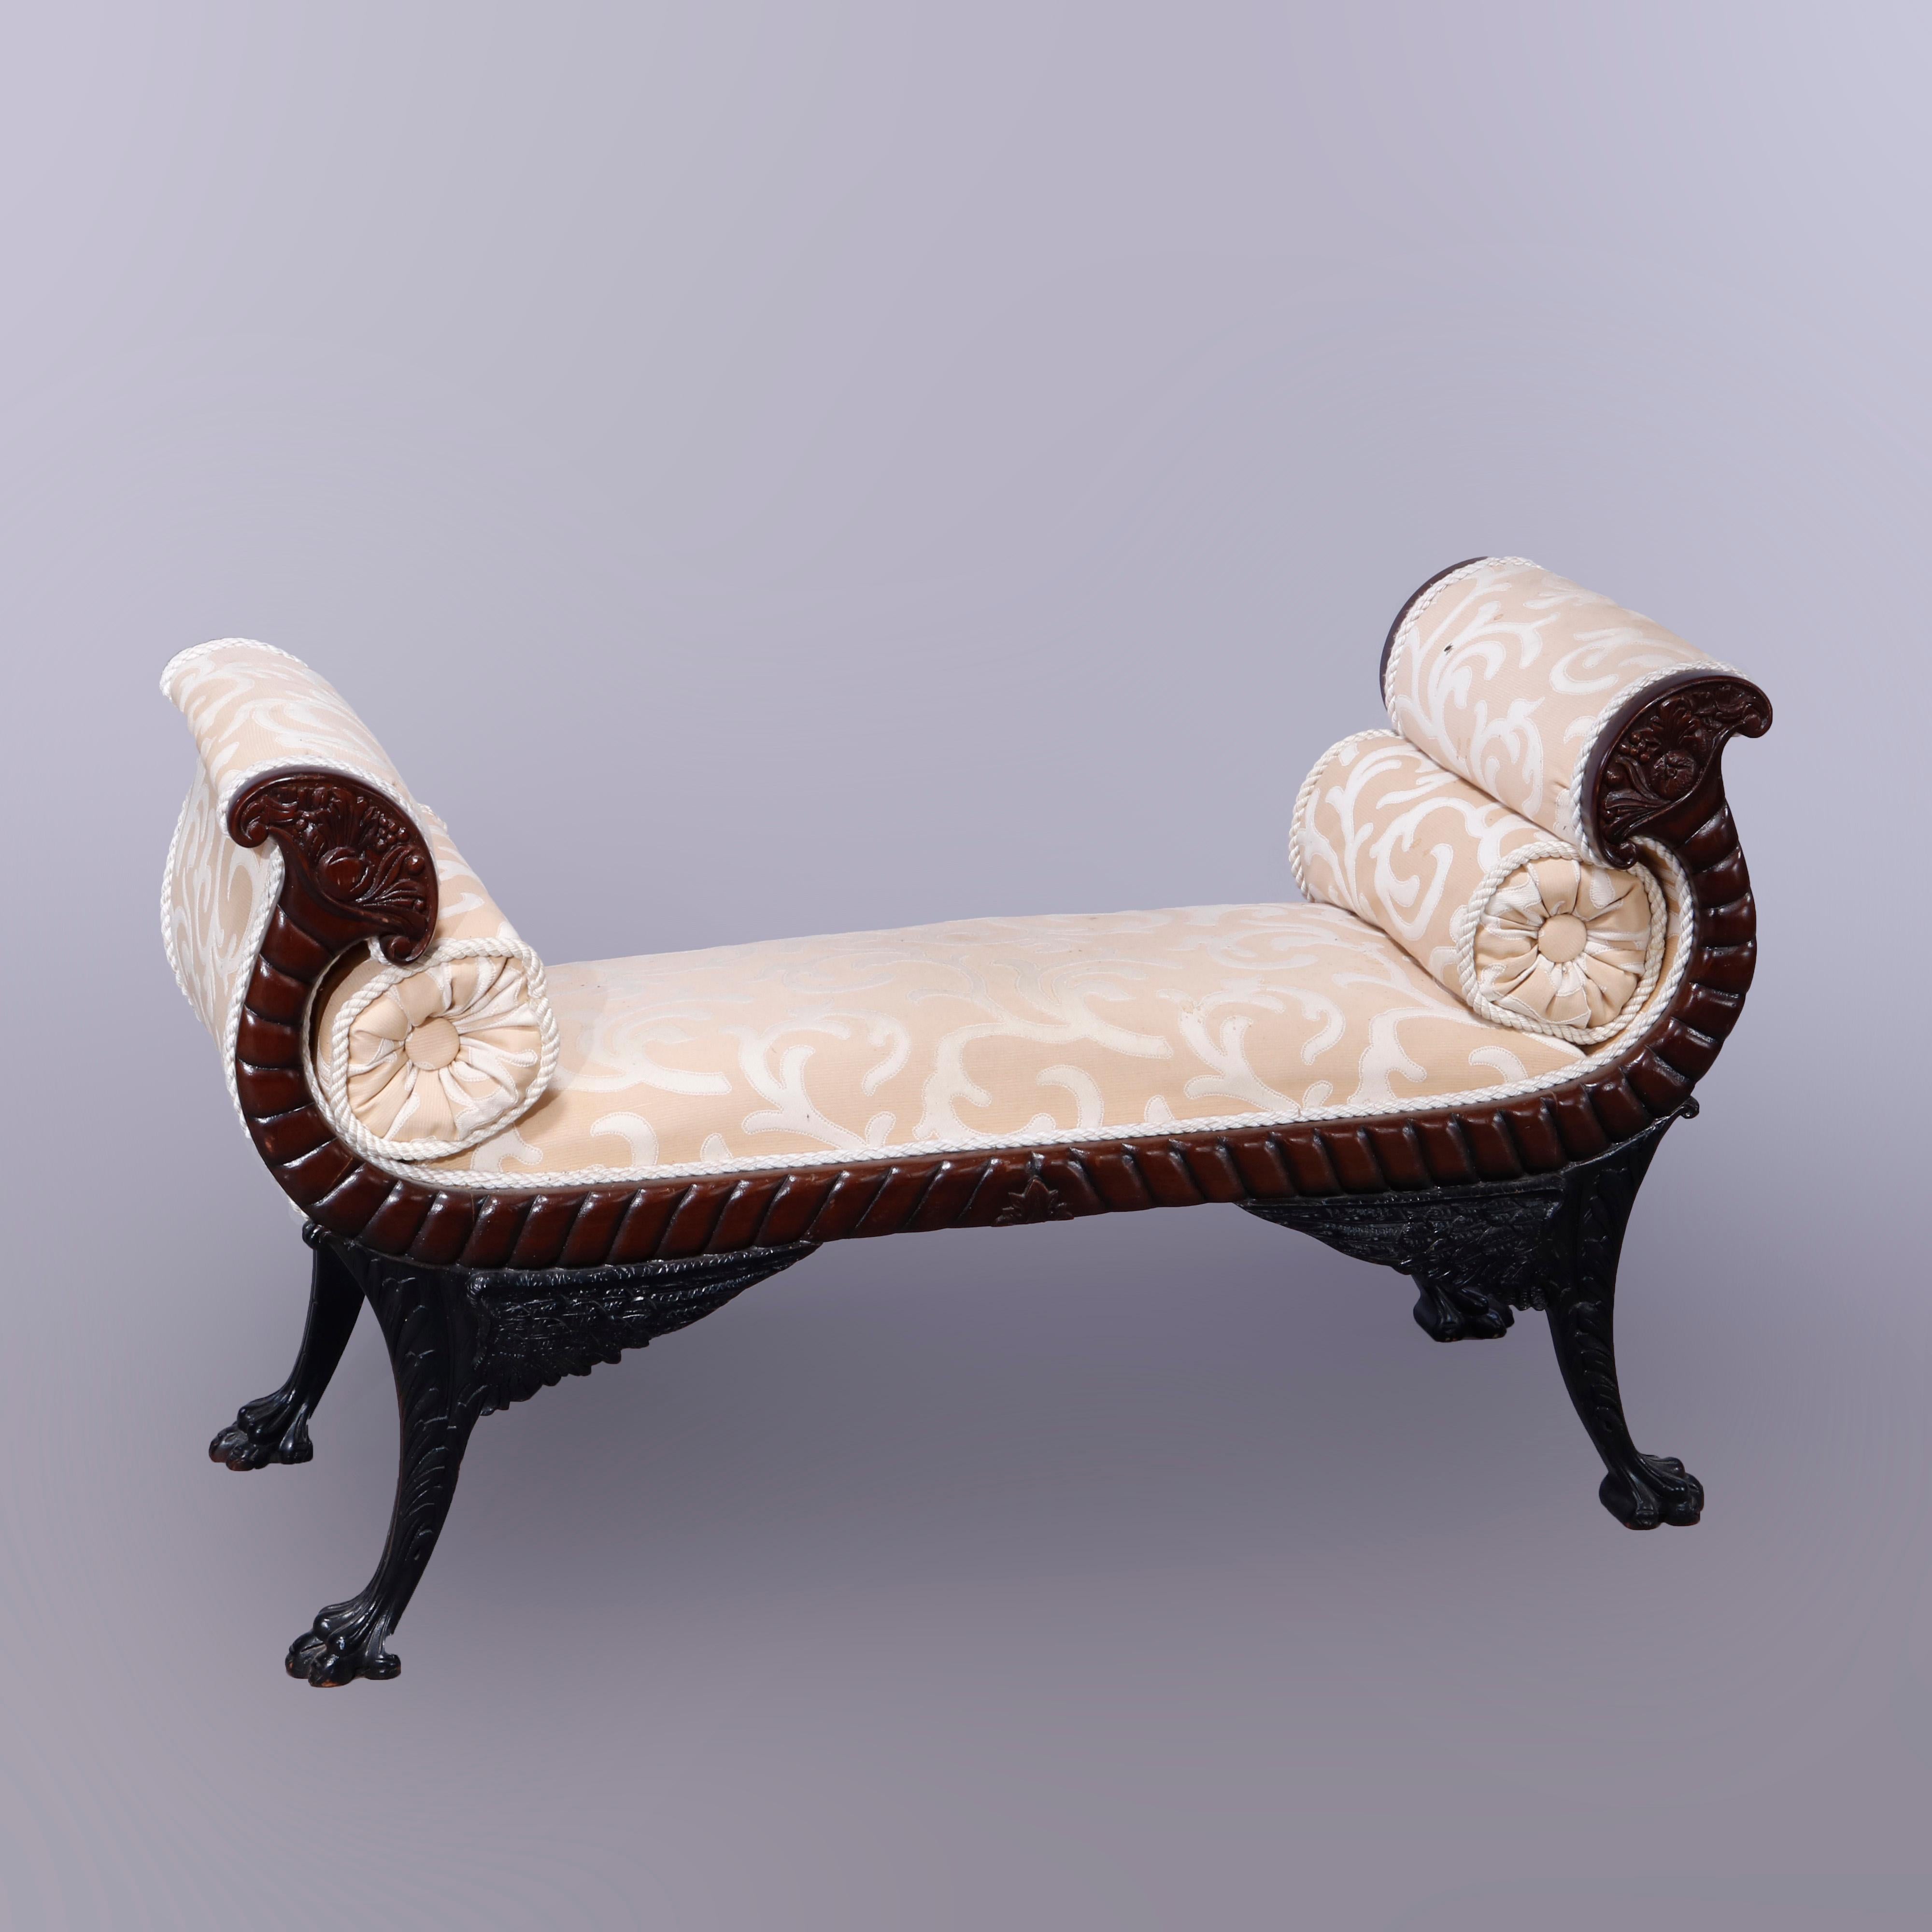 20th Century Antique American Empire Neoclassical Style Claw Foot Window Bench, 20th C